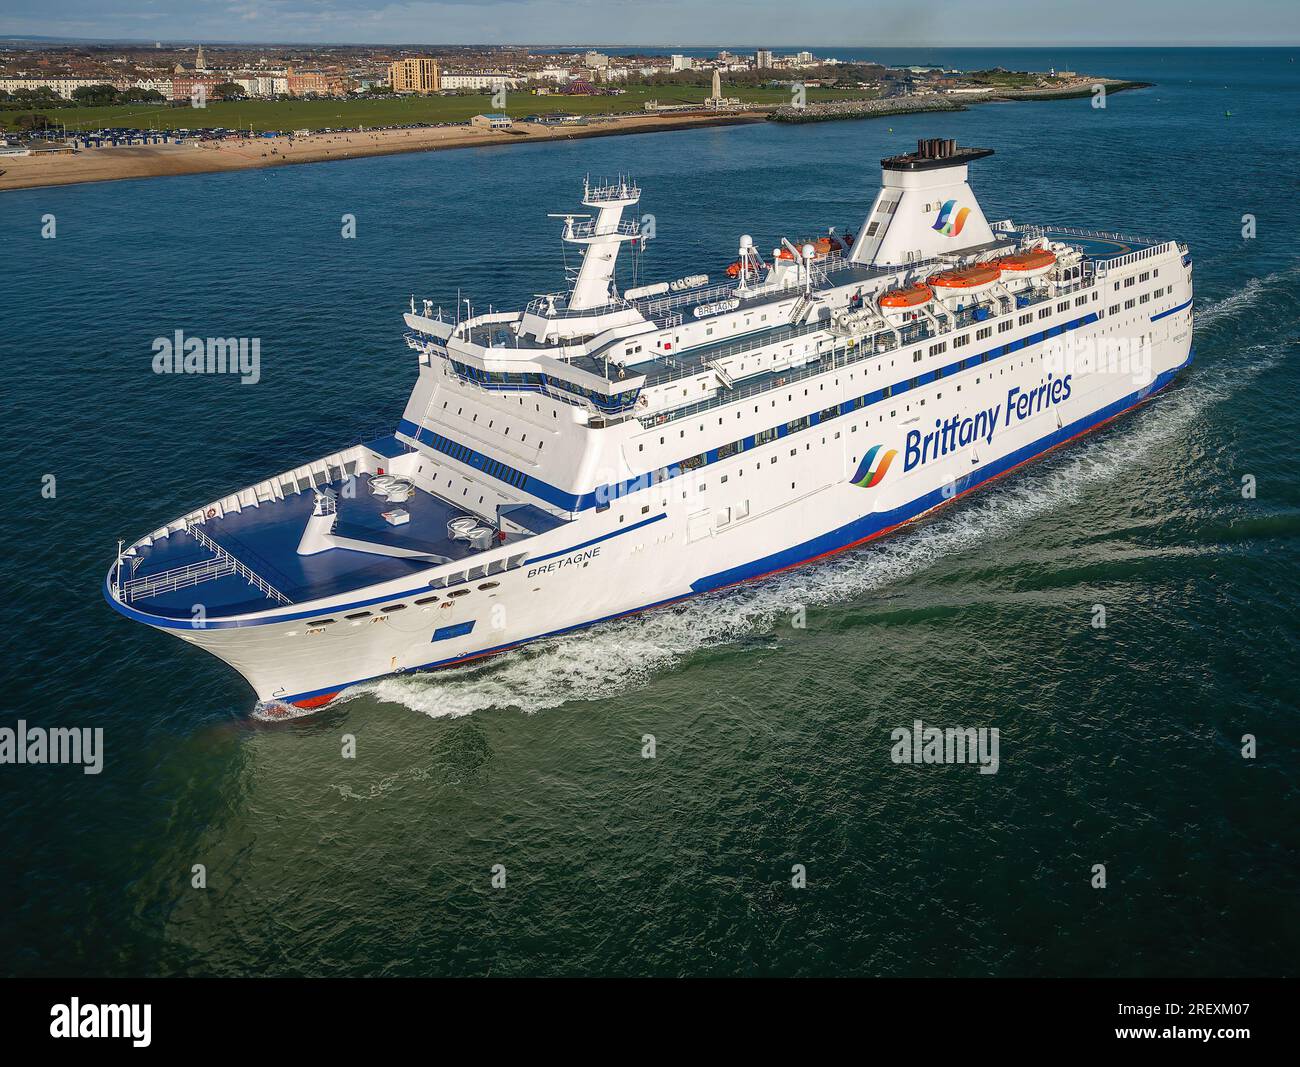 Bretagne is a cross-Channel ferry operated by Brittany Ferries between Portsmouth and St Malo. Stock Photo